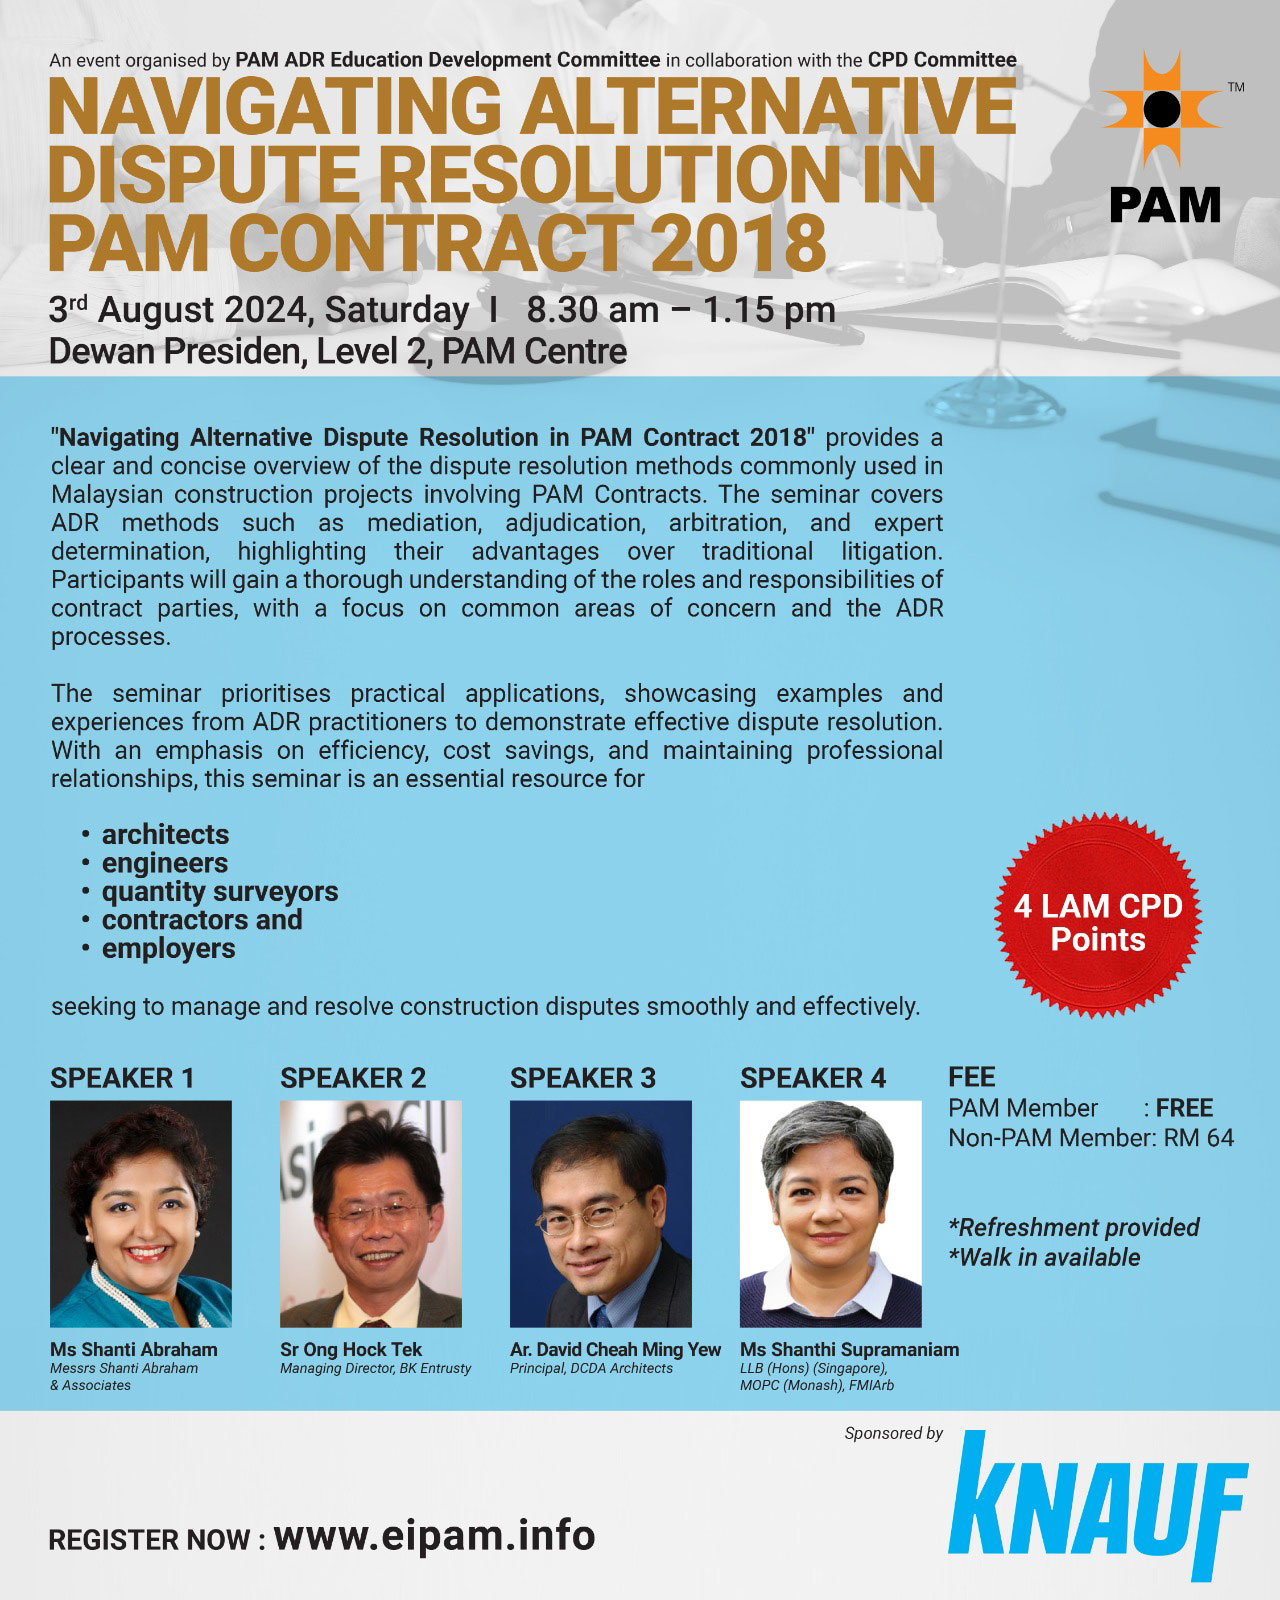 Navigating Alternative Dispute Resolution in PAM Contract 2018